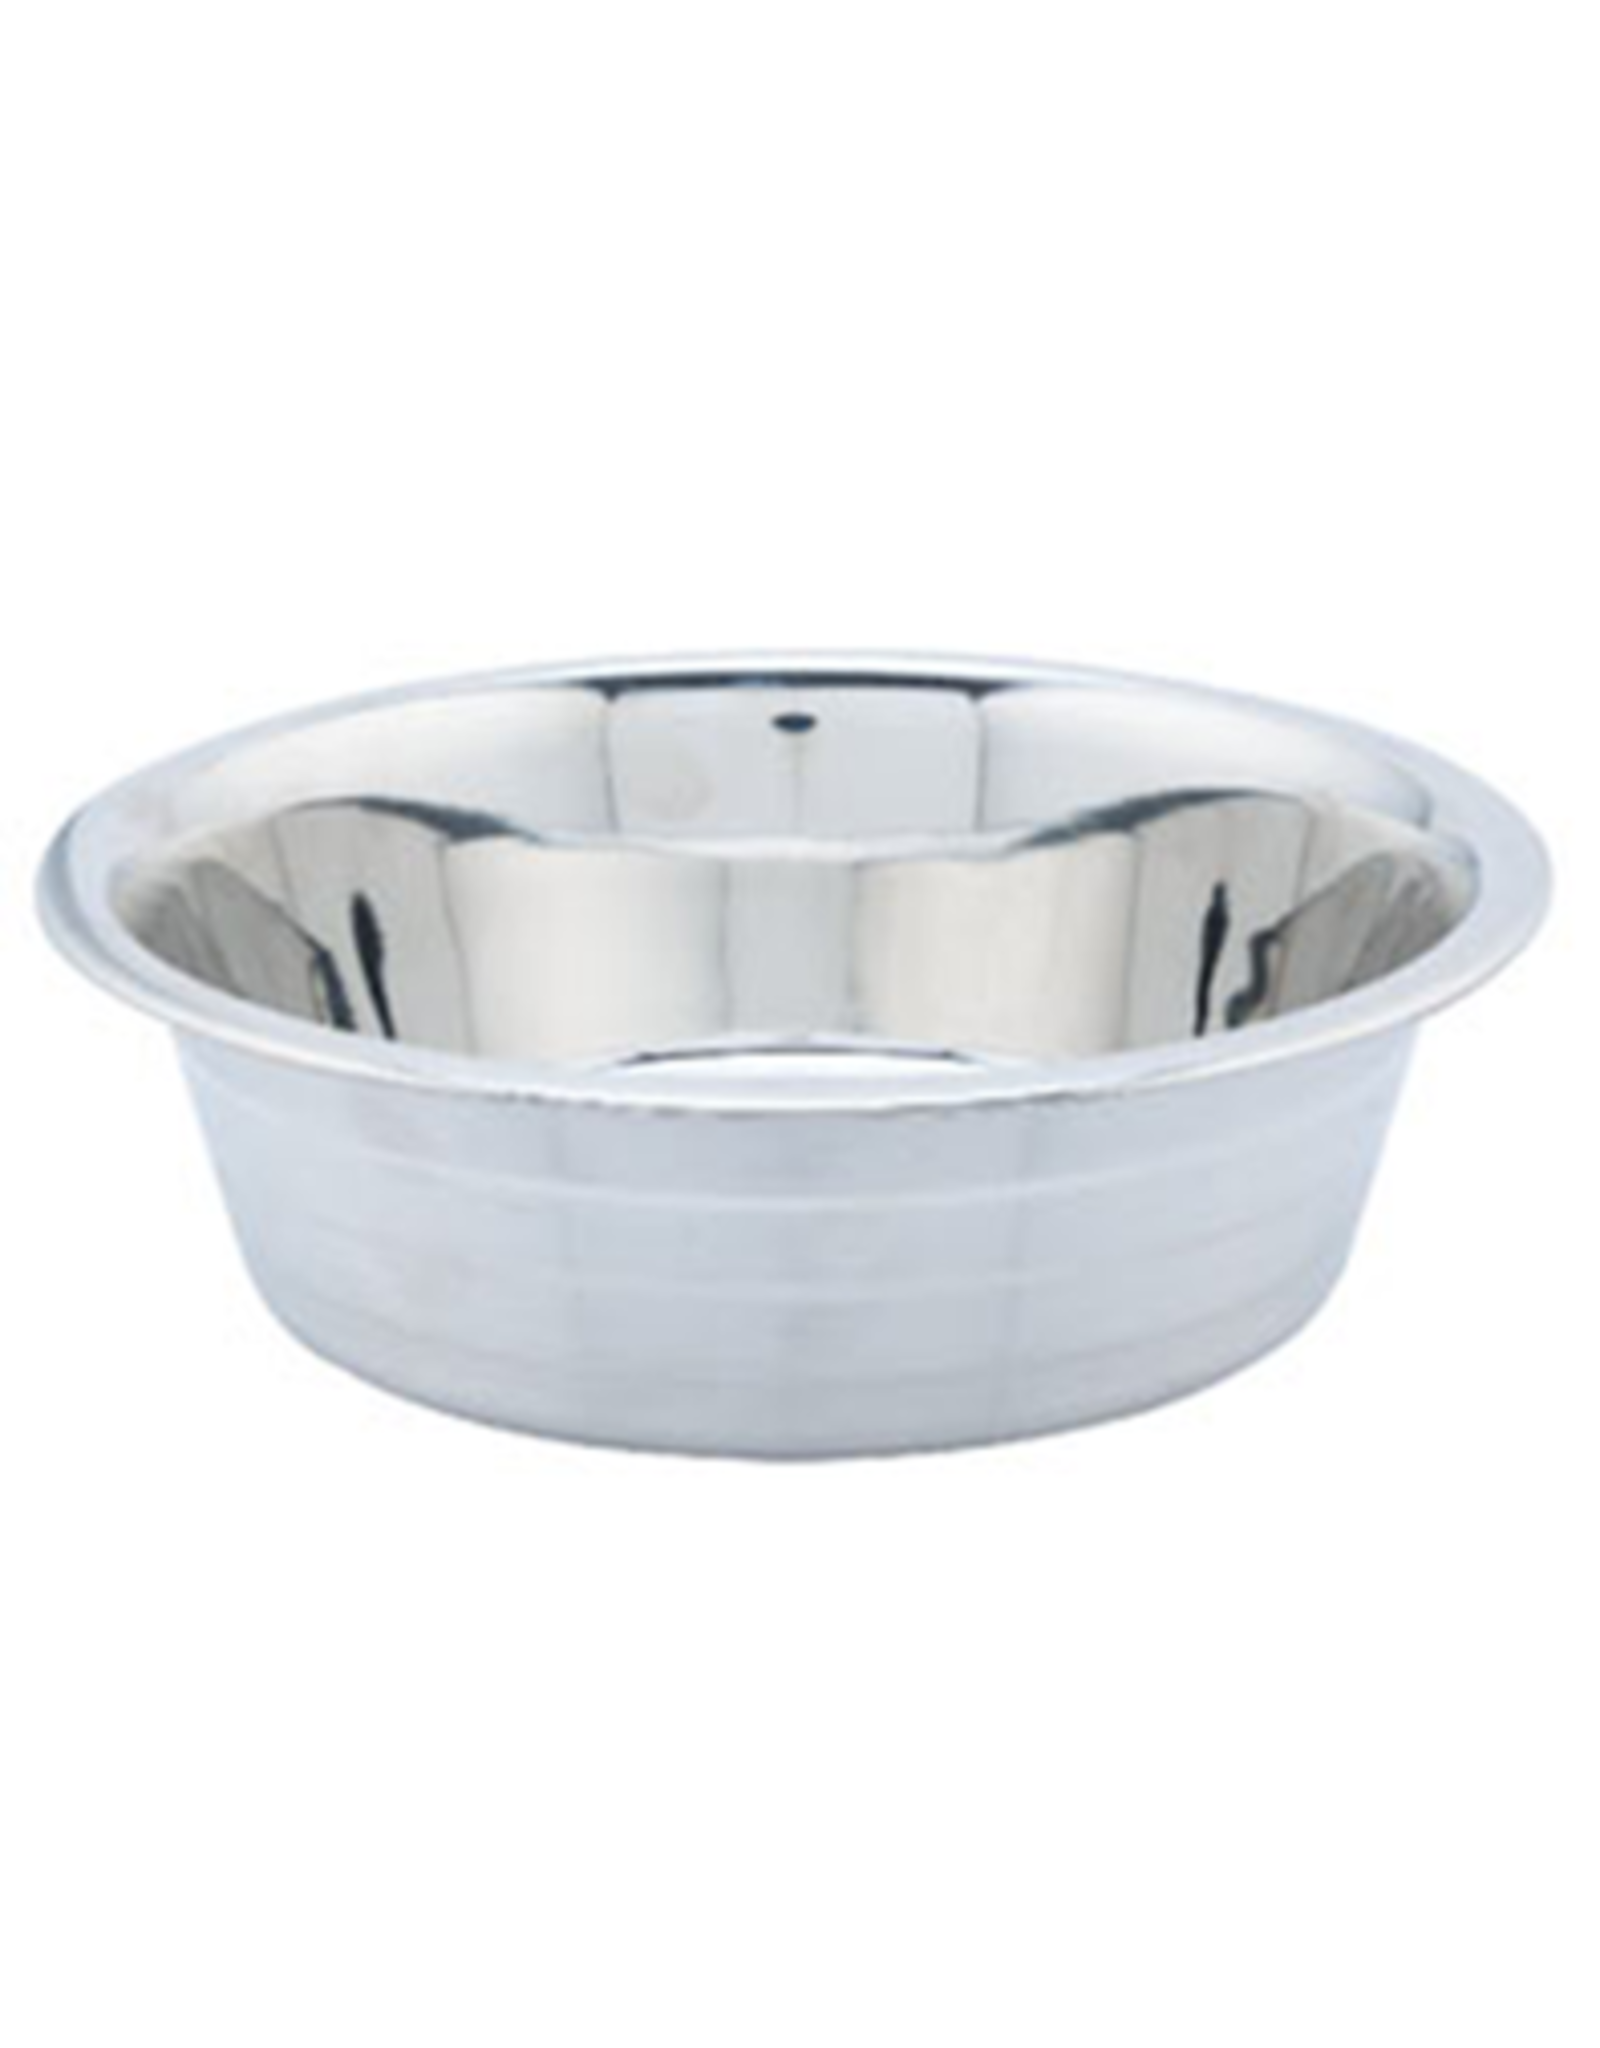 Indipets Indipets Stainless Steel Feeding Bowl